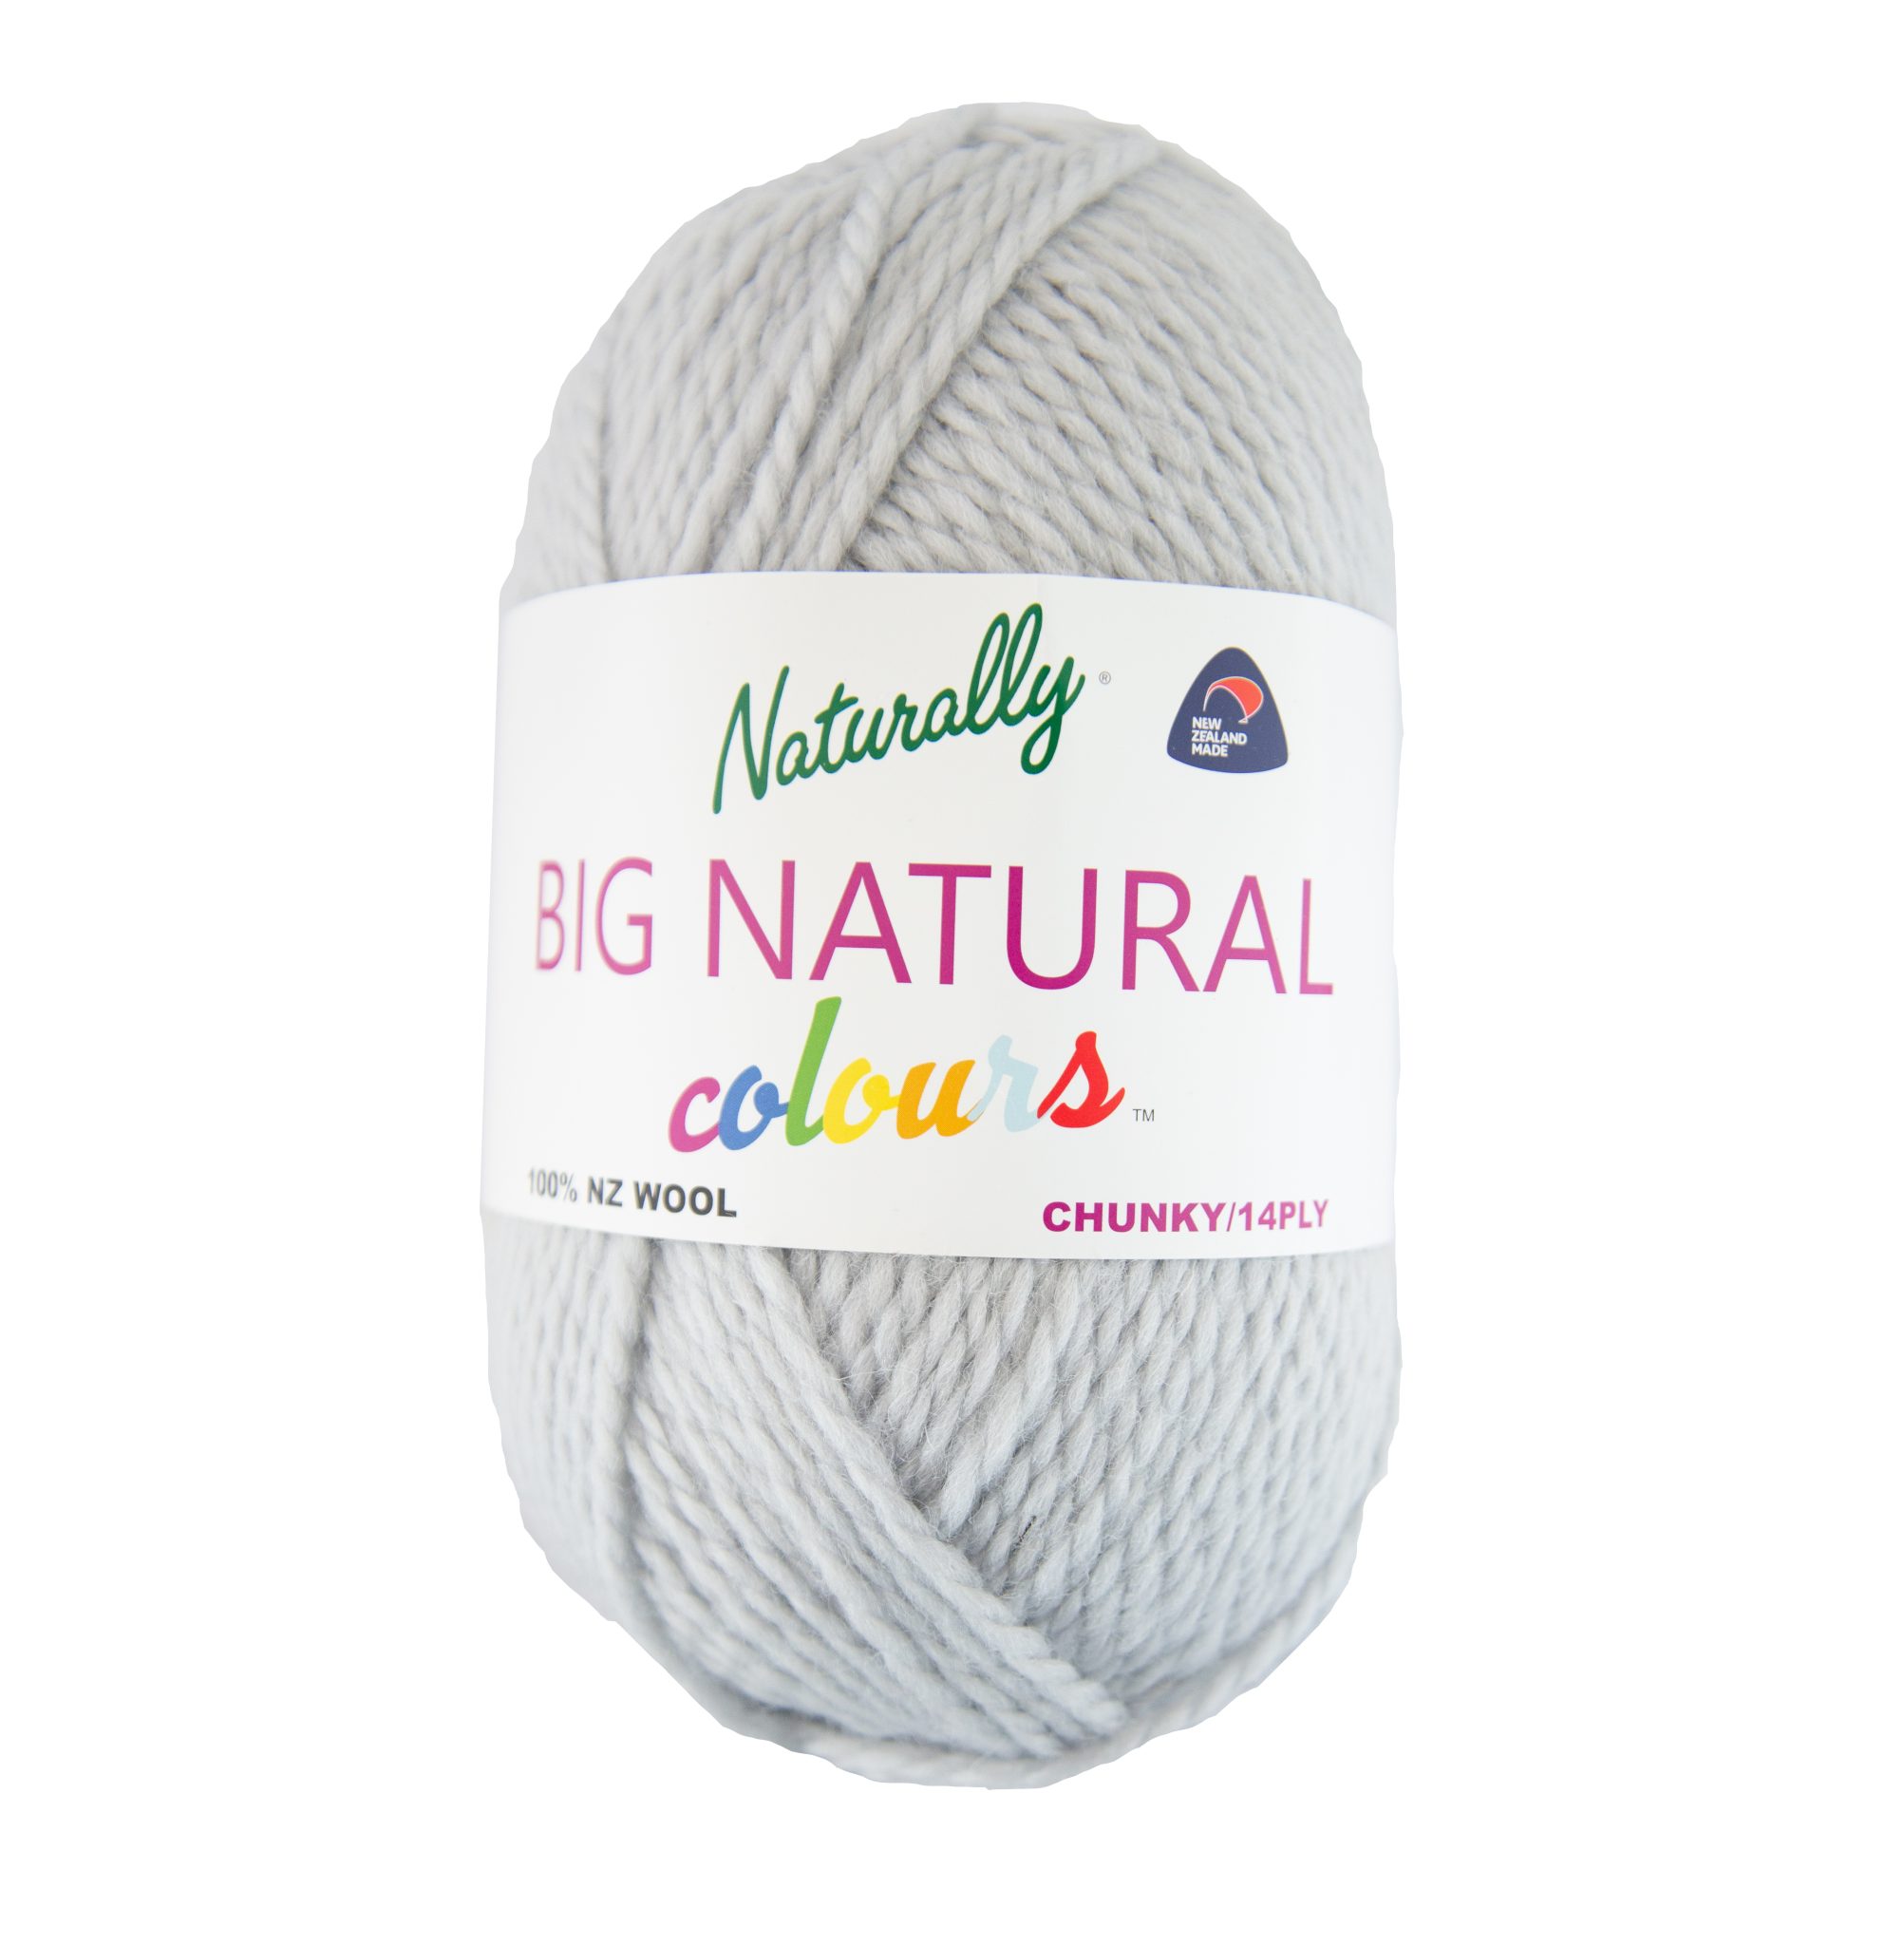 Naturally Big Natural Colours Chunky 14ply NZ Wool - Fast Shipping